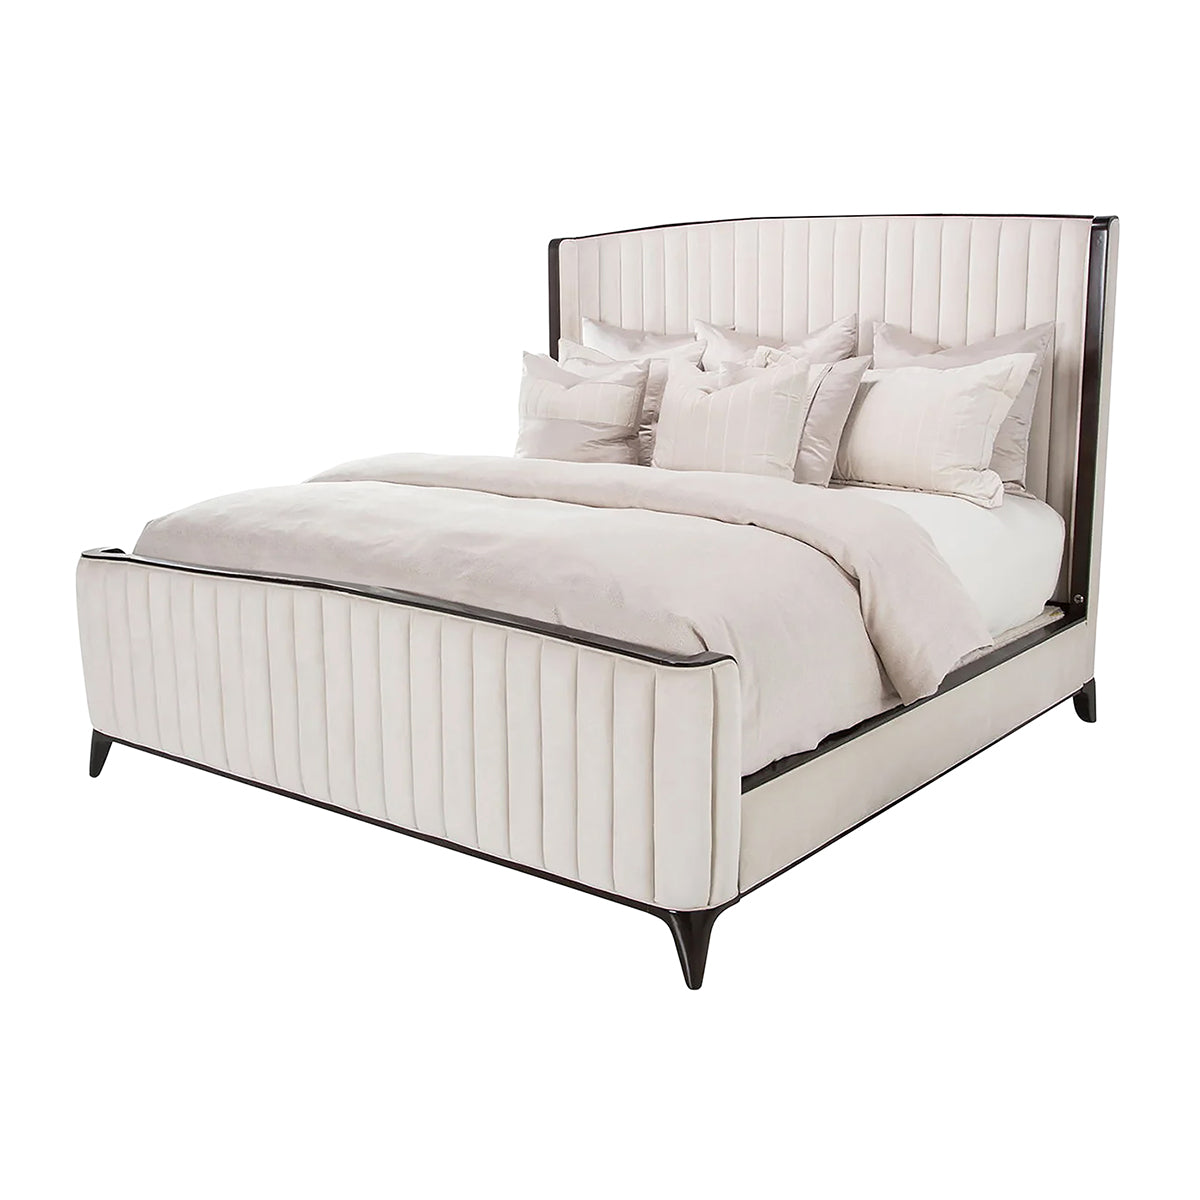 Britain 2-tone Upholstery Bed